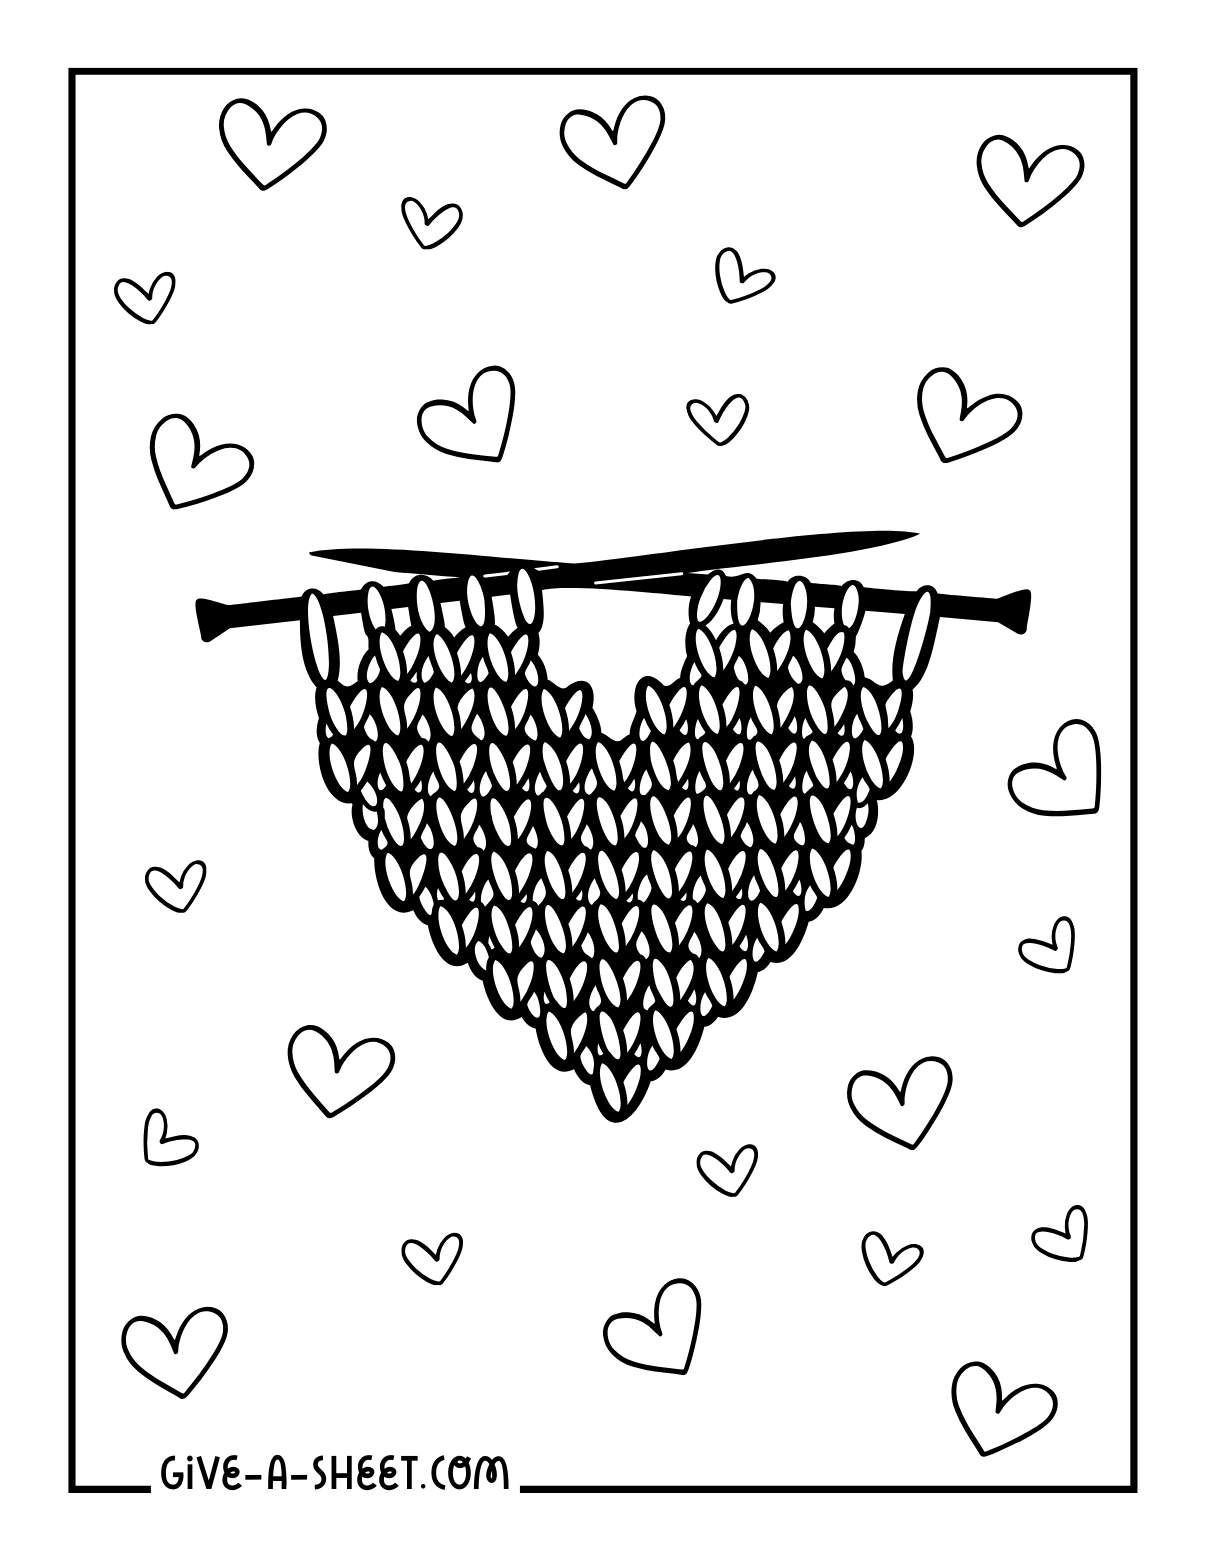 Heart knit stitch coloring page.